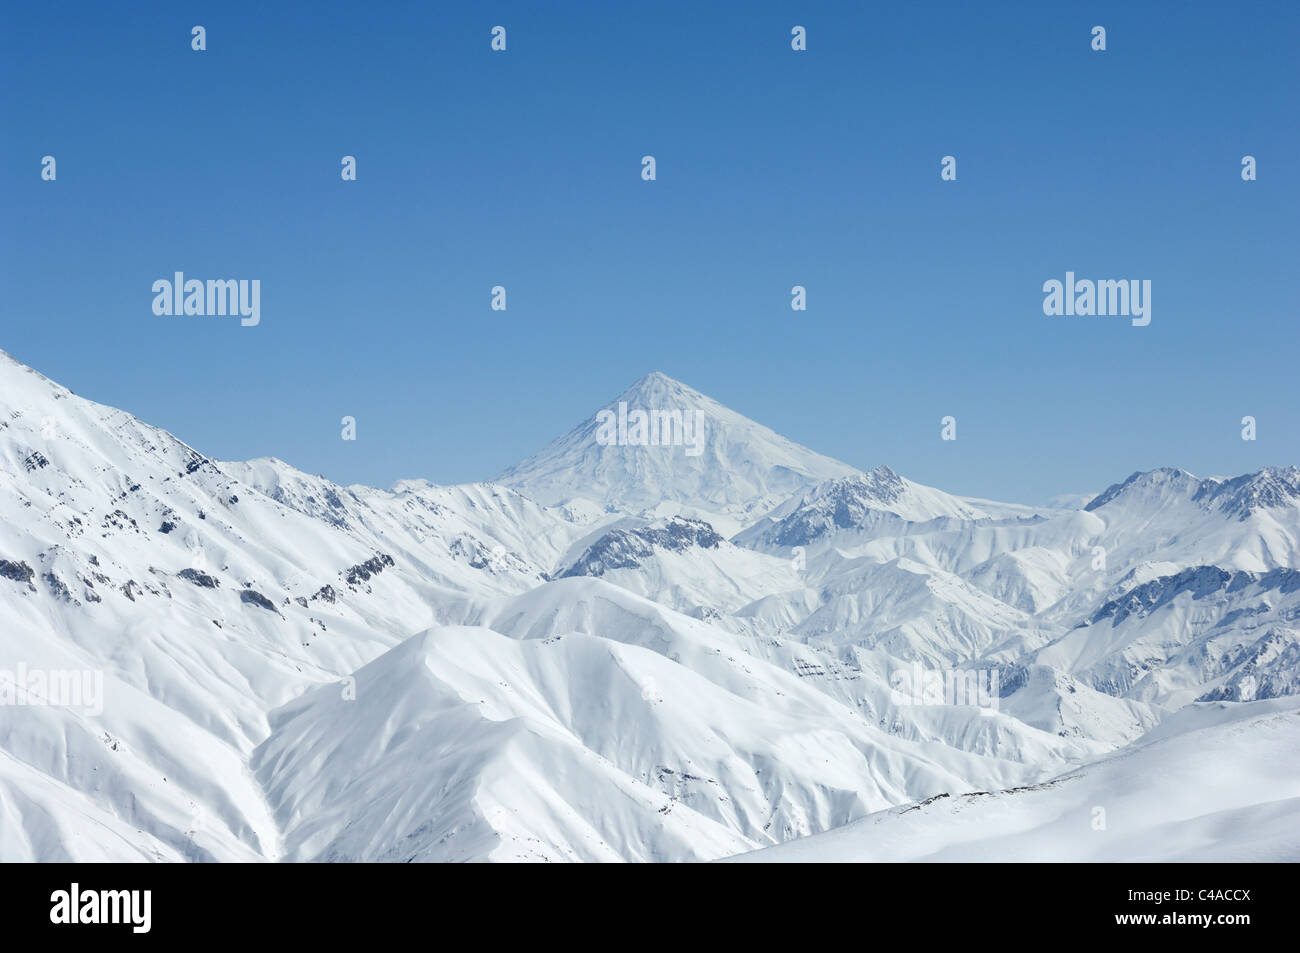 A snow covered Mount Damavand in the Alborz mountains of Iran Stock Photo